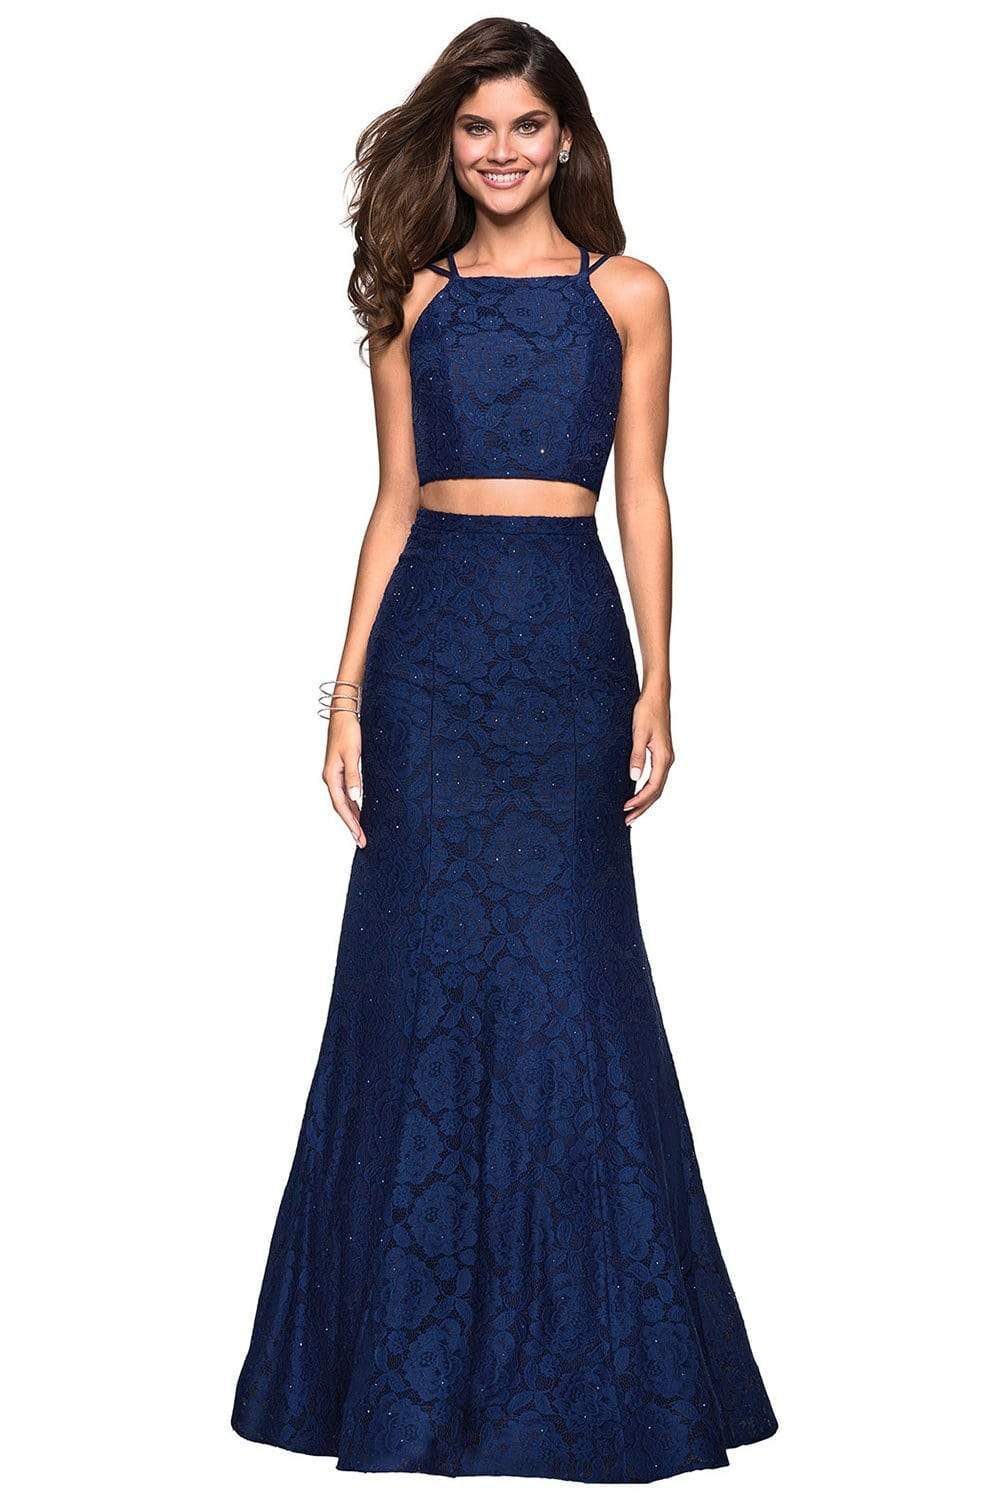 Image of La Femme - 27452 Strappy Two Piece Halter Trumpet Gown